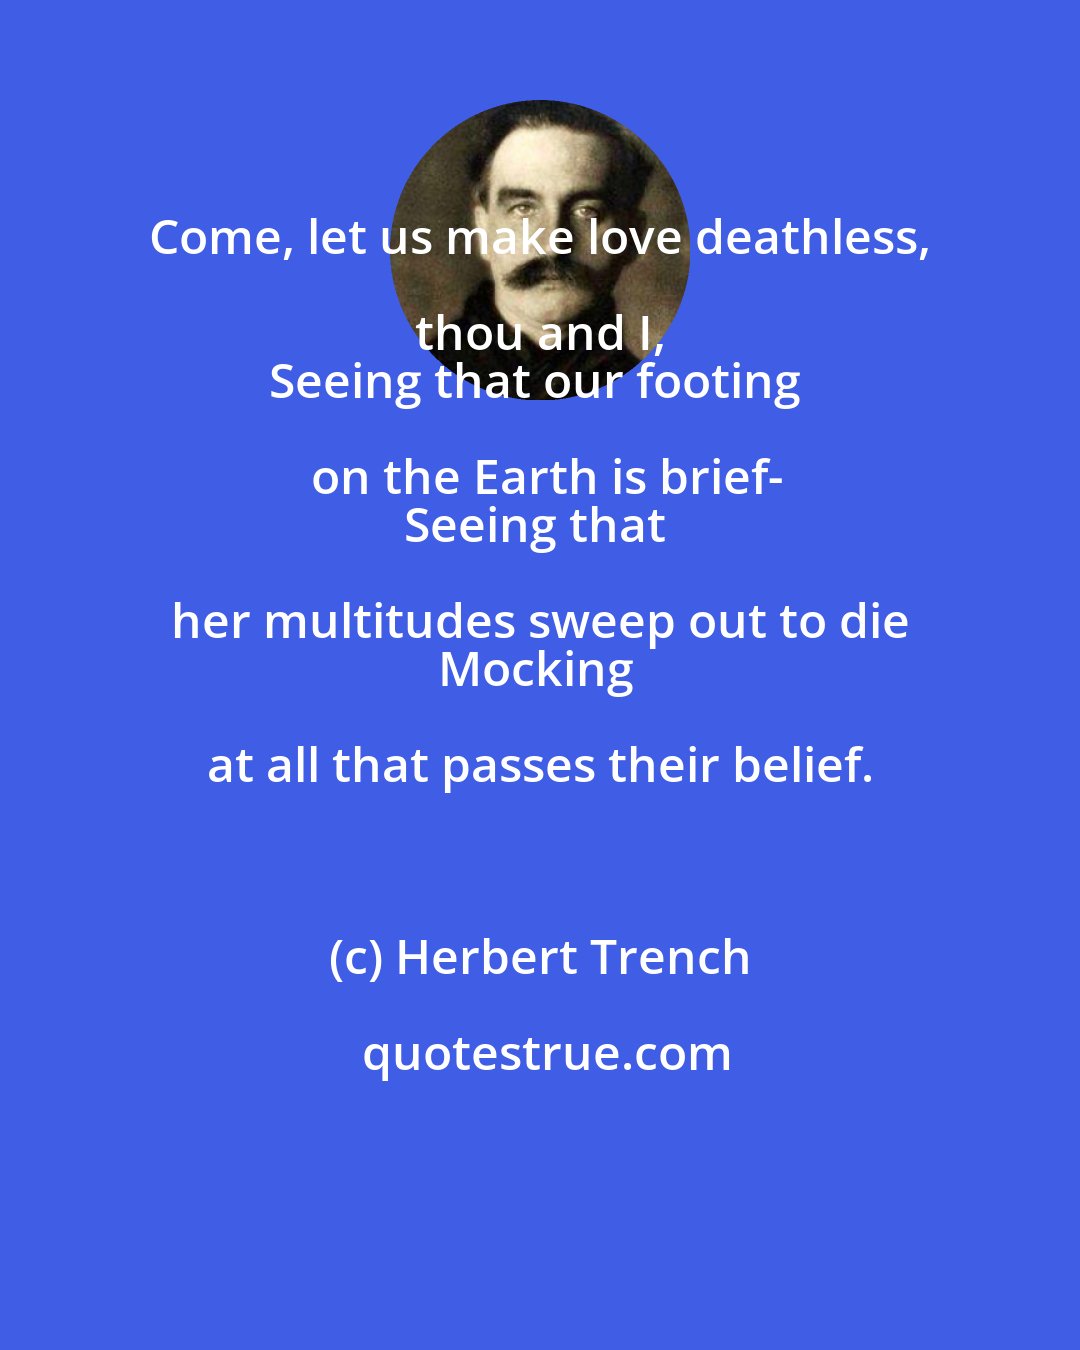 Herbert Trench: Come, let us make love deathless, thou and I, 
Seeing that our footing on the Earth is brief-
Seeing that her multitudes sweep out to die 
Mocking at all that passes their belief.